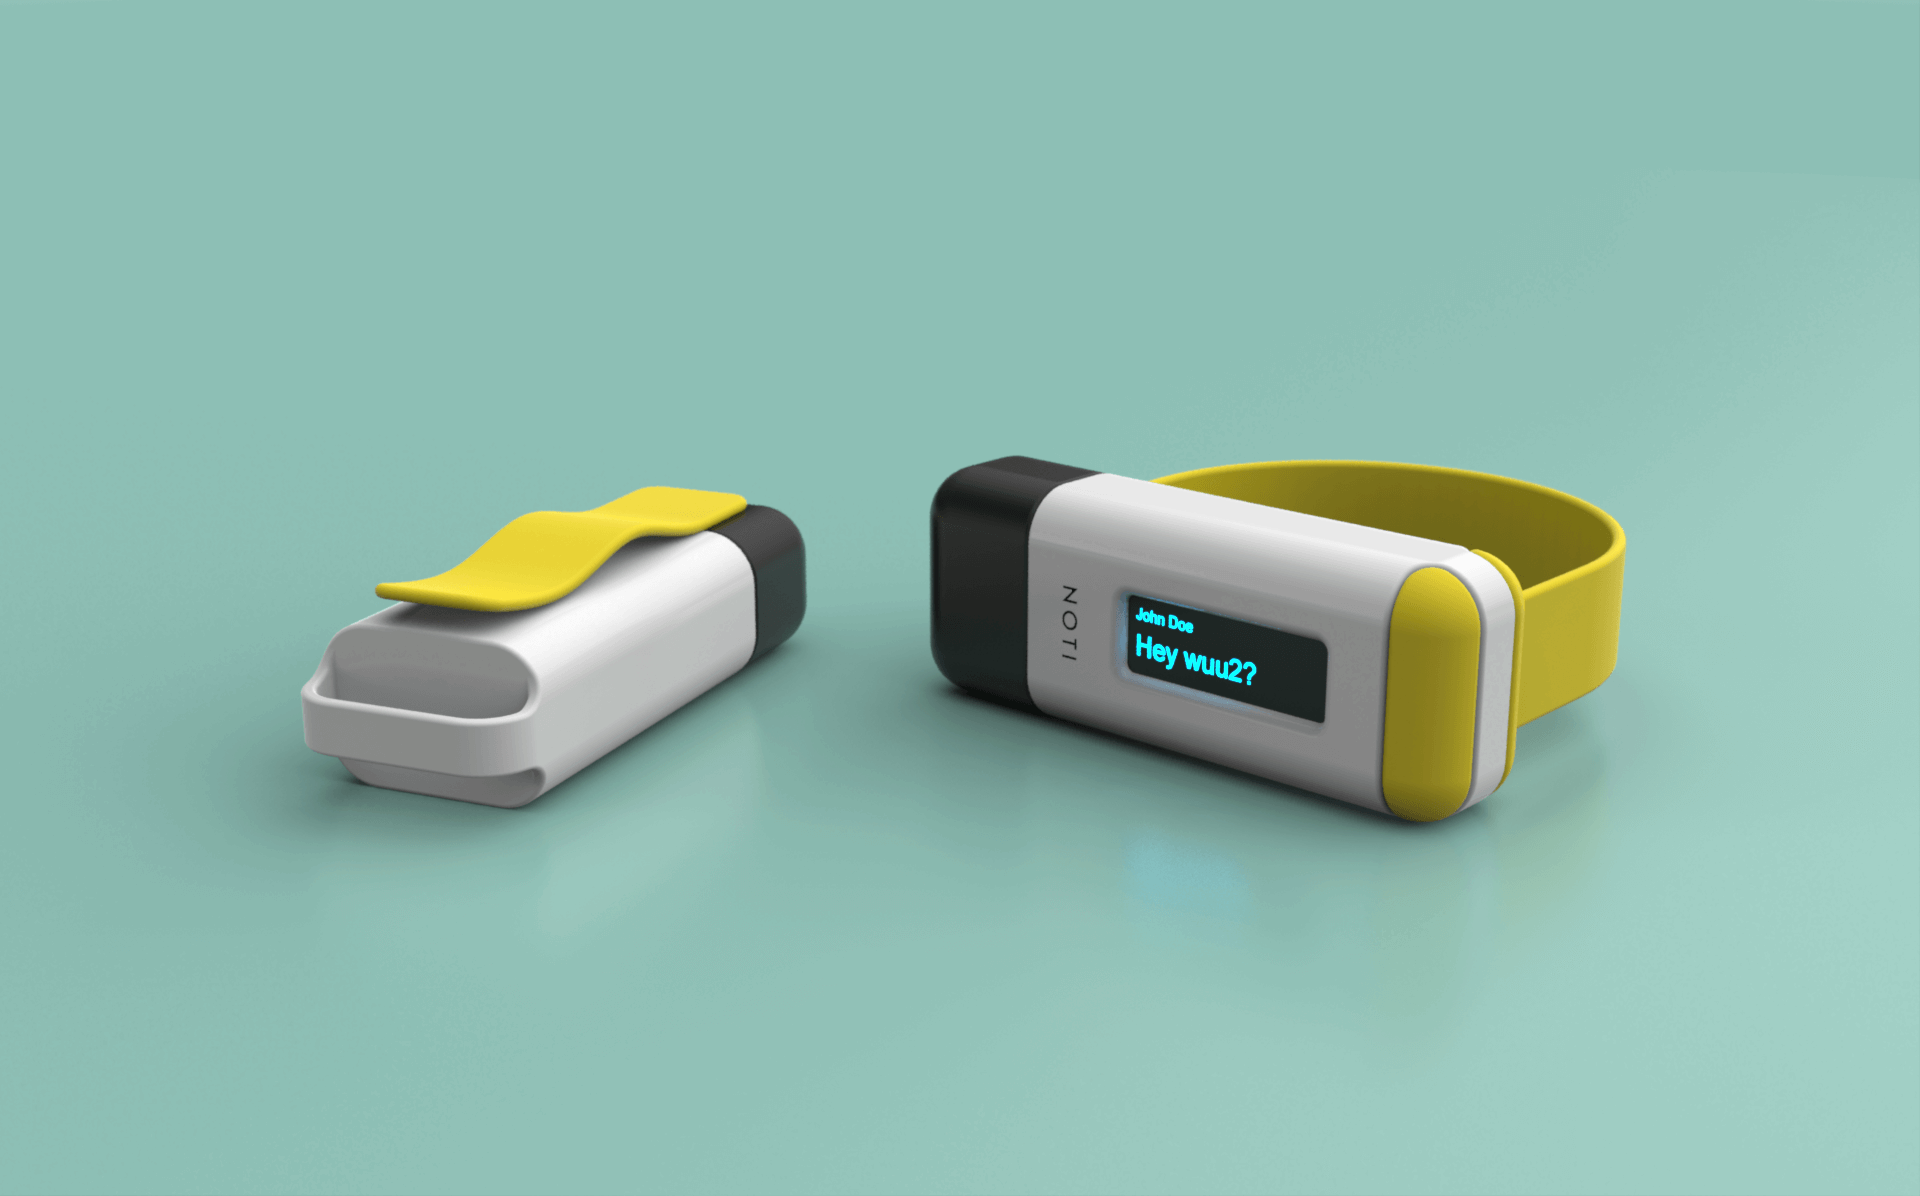 Noti product concept design with electronic design